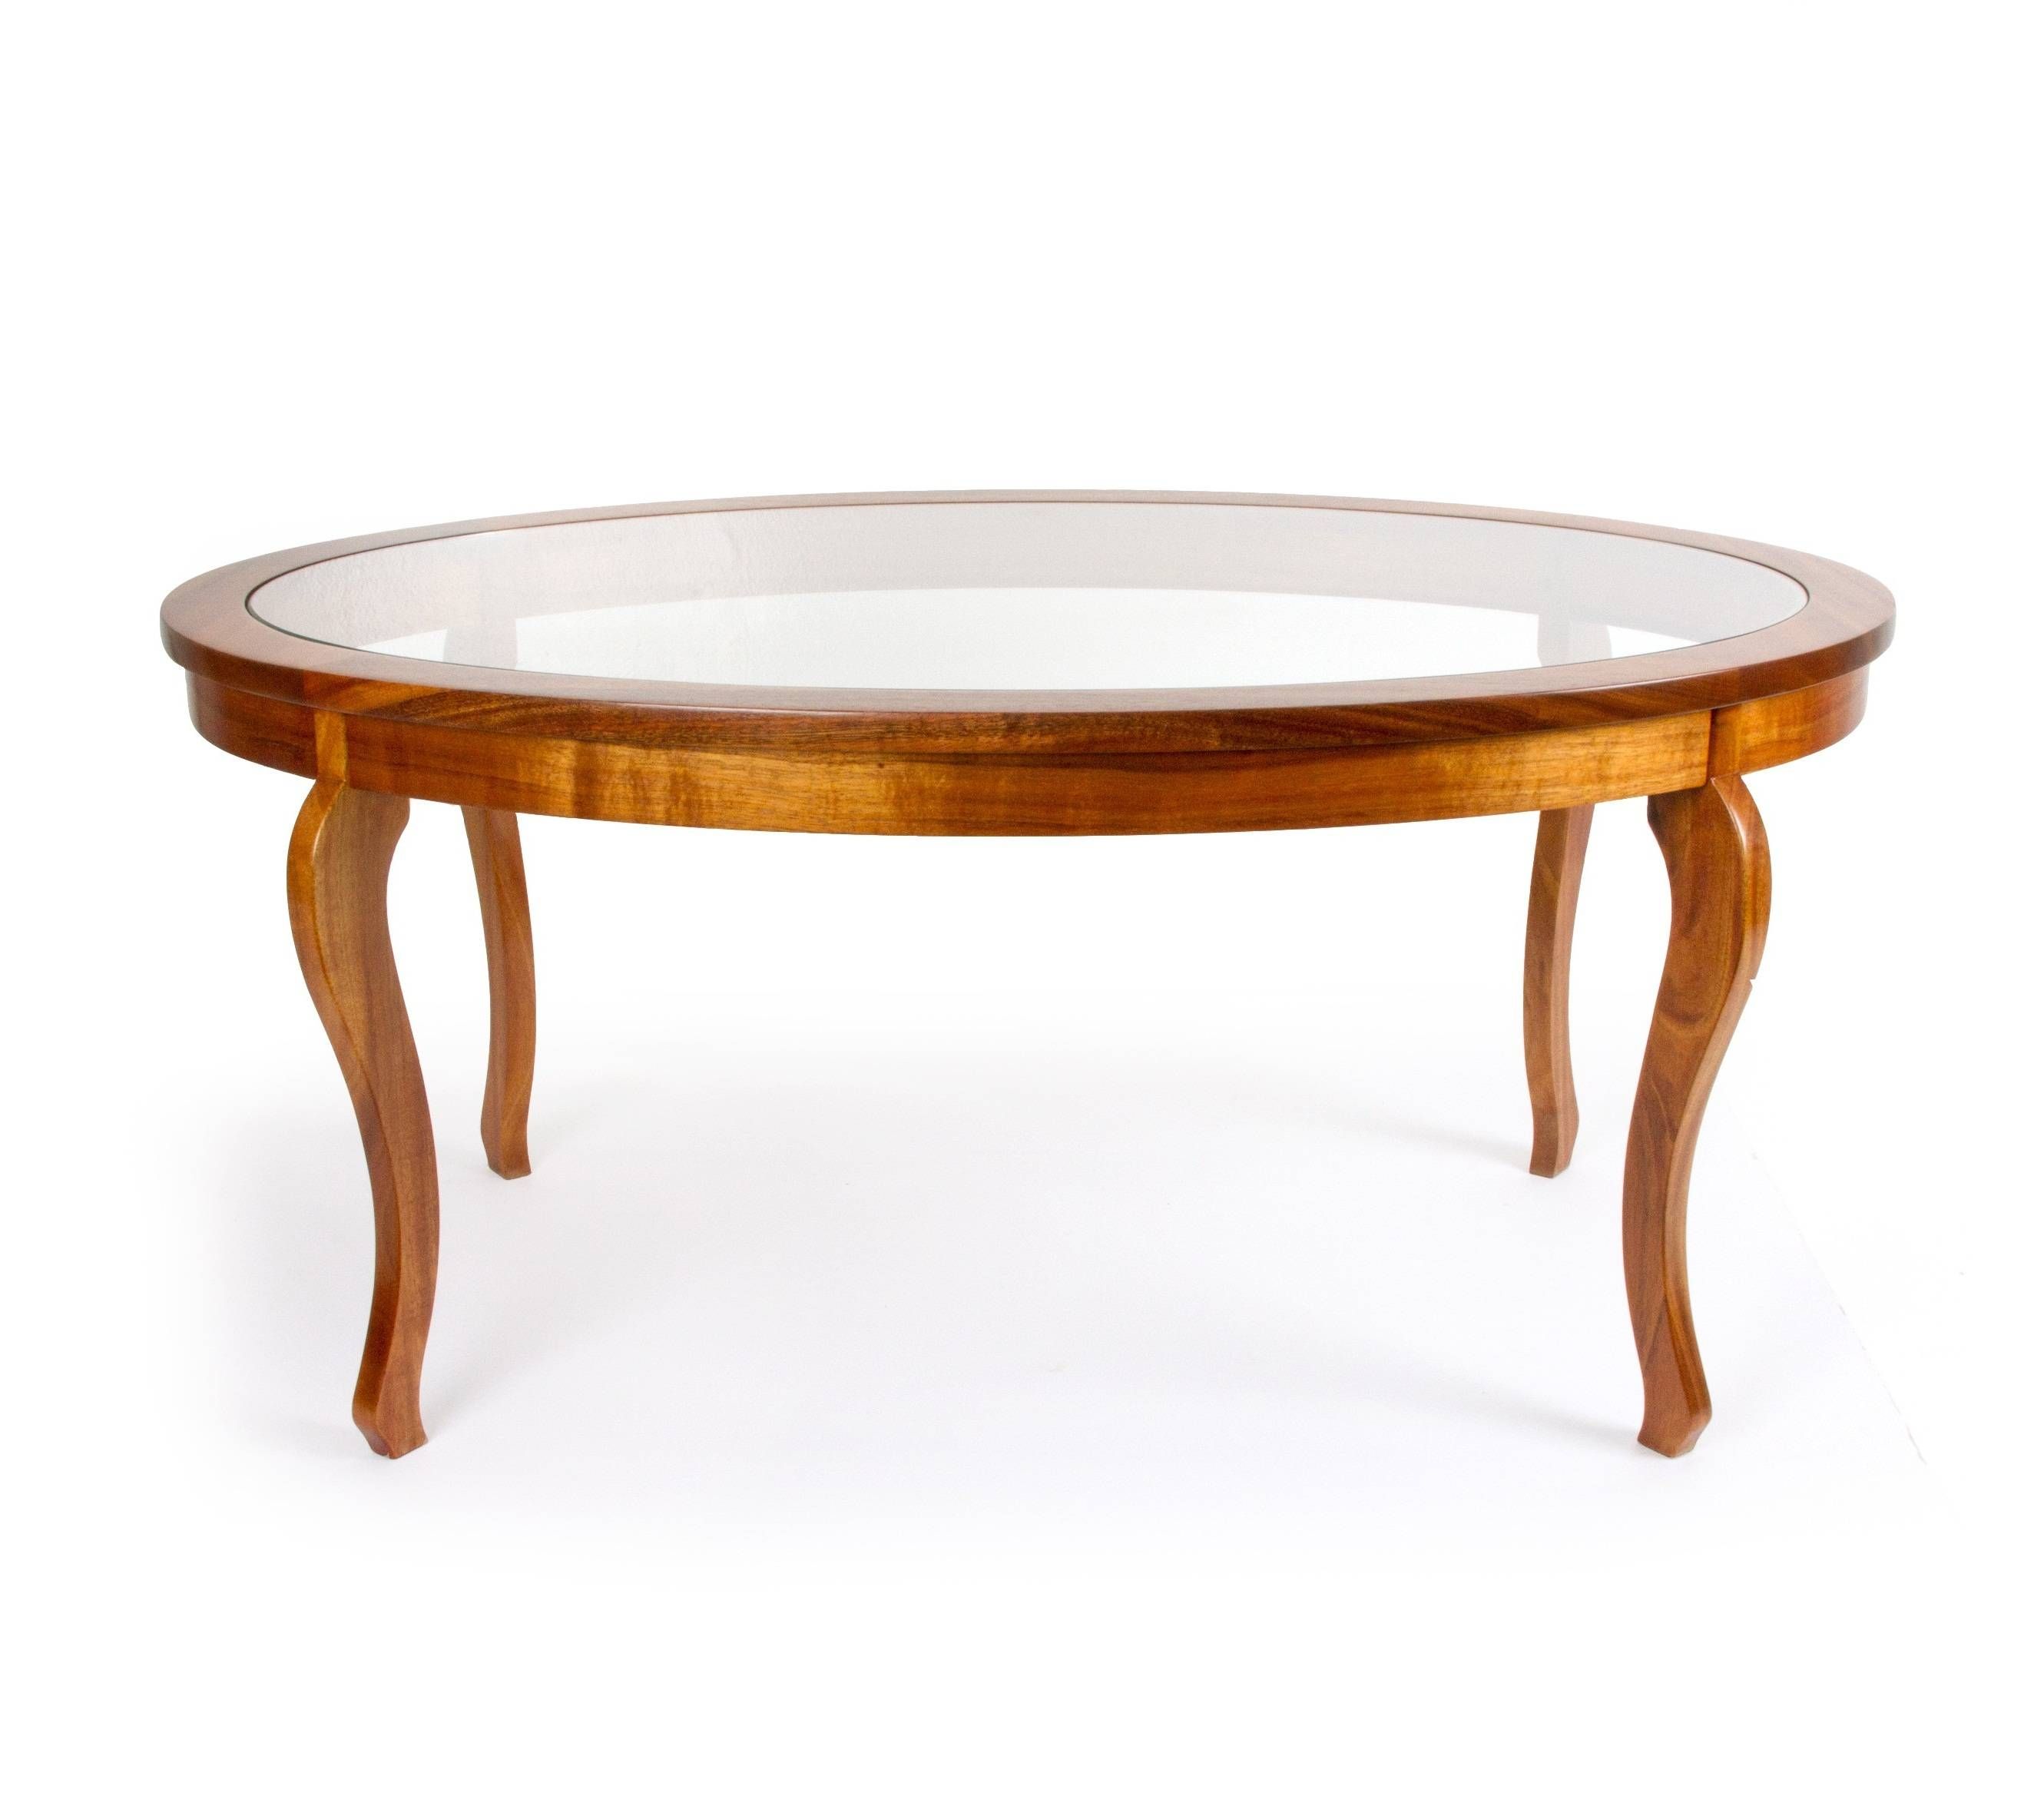 Exactly Amazing Narrow Coffee Table – Small Coffee Table, Round Pertaining To Oval Glass And Wood Coffee Tables (View 11 of 30)